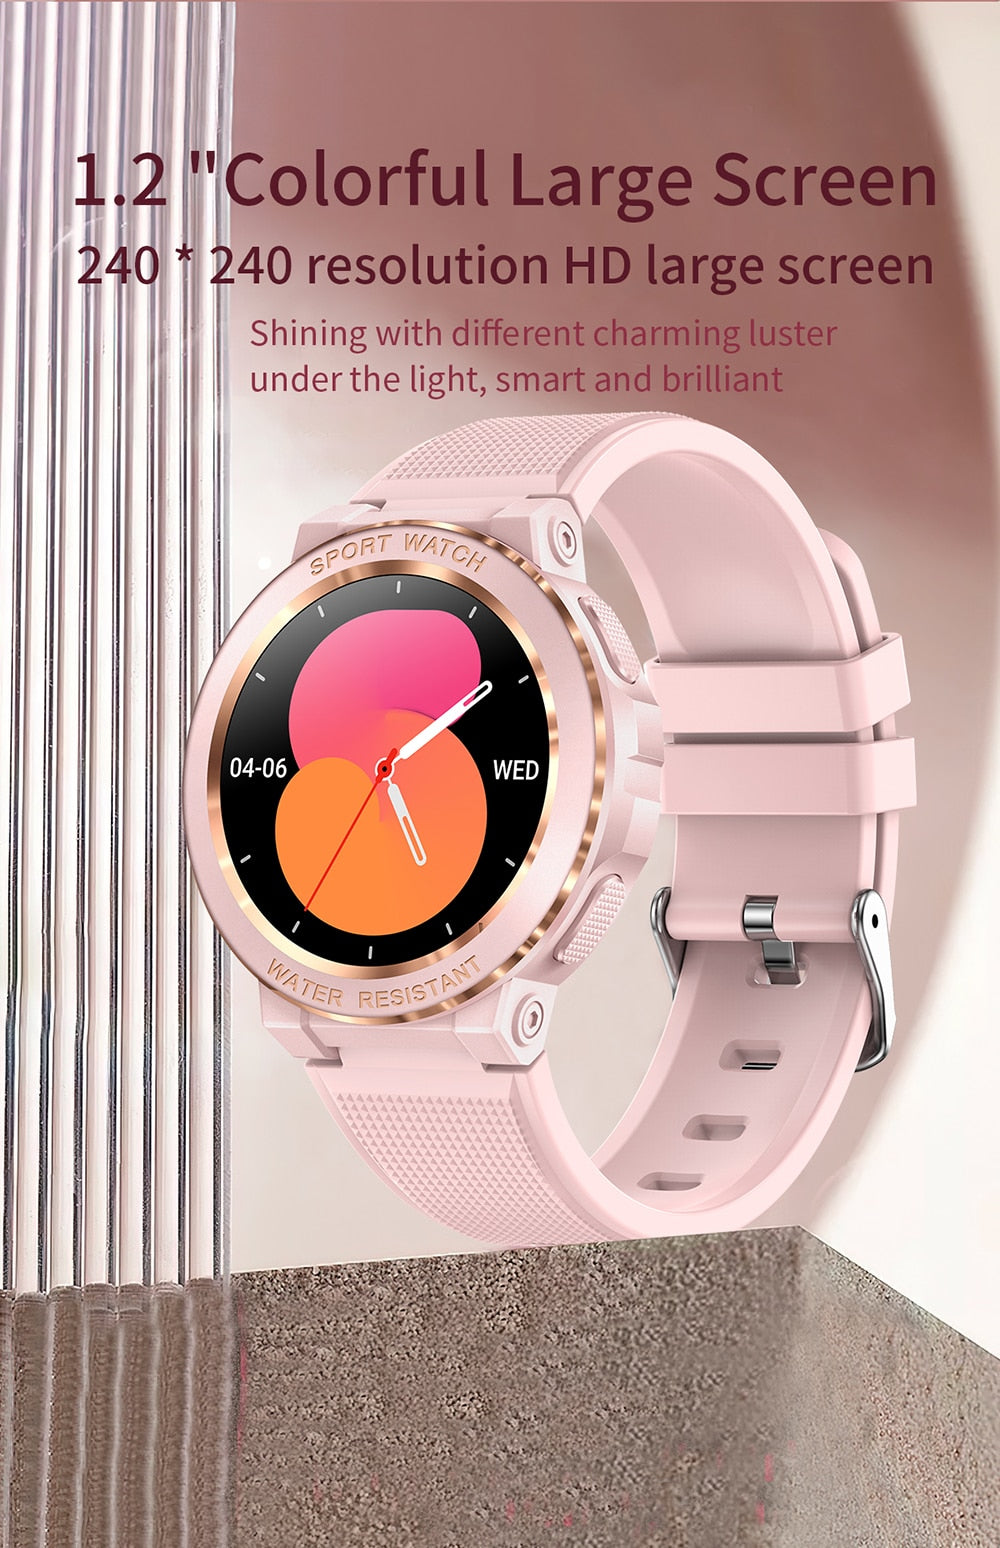 Stay Active and Stylish with the Pibi Electronics Women's Smart Watch - Your Fitness Companion